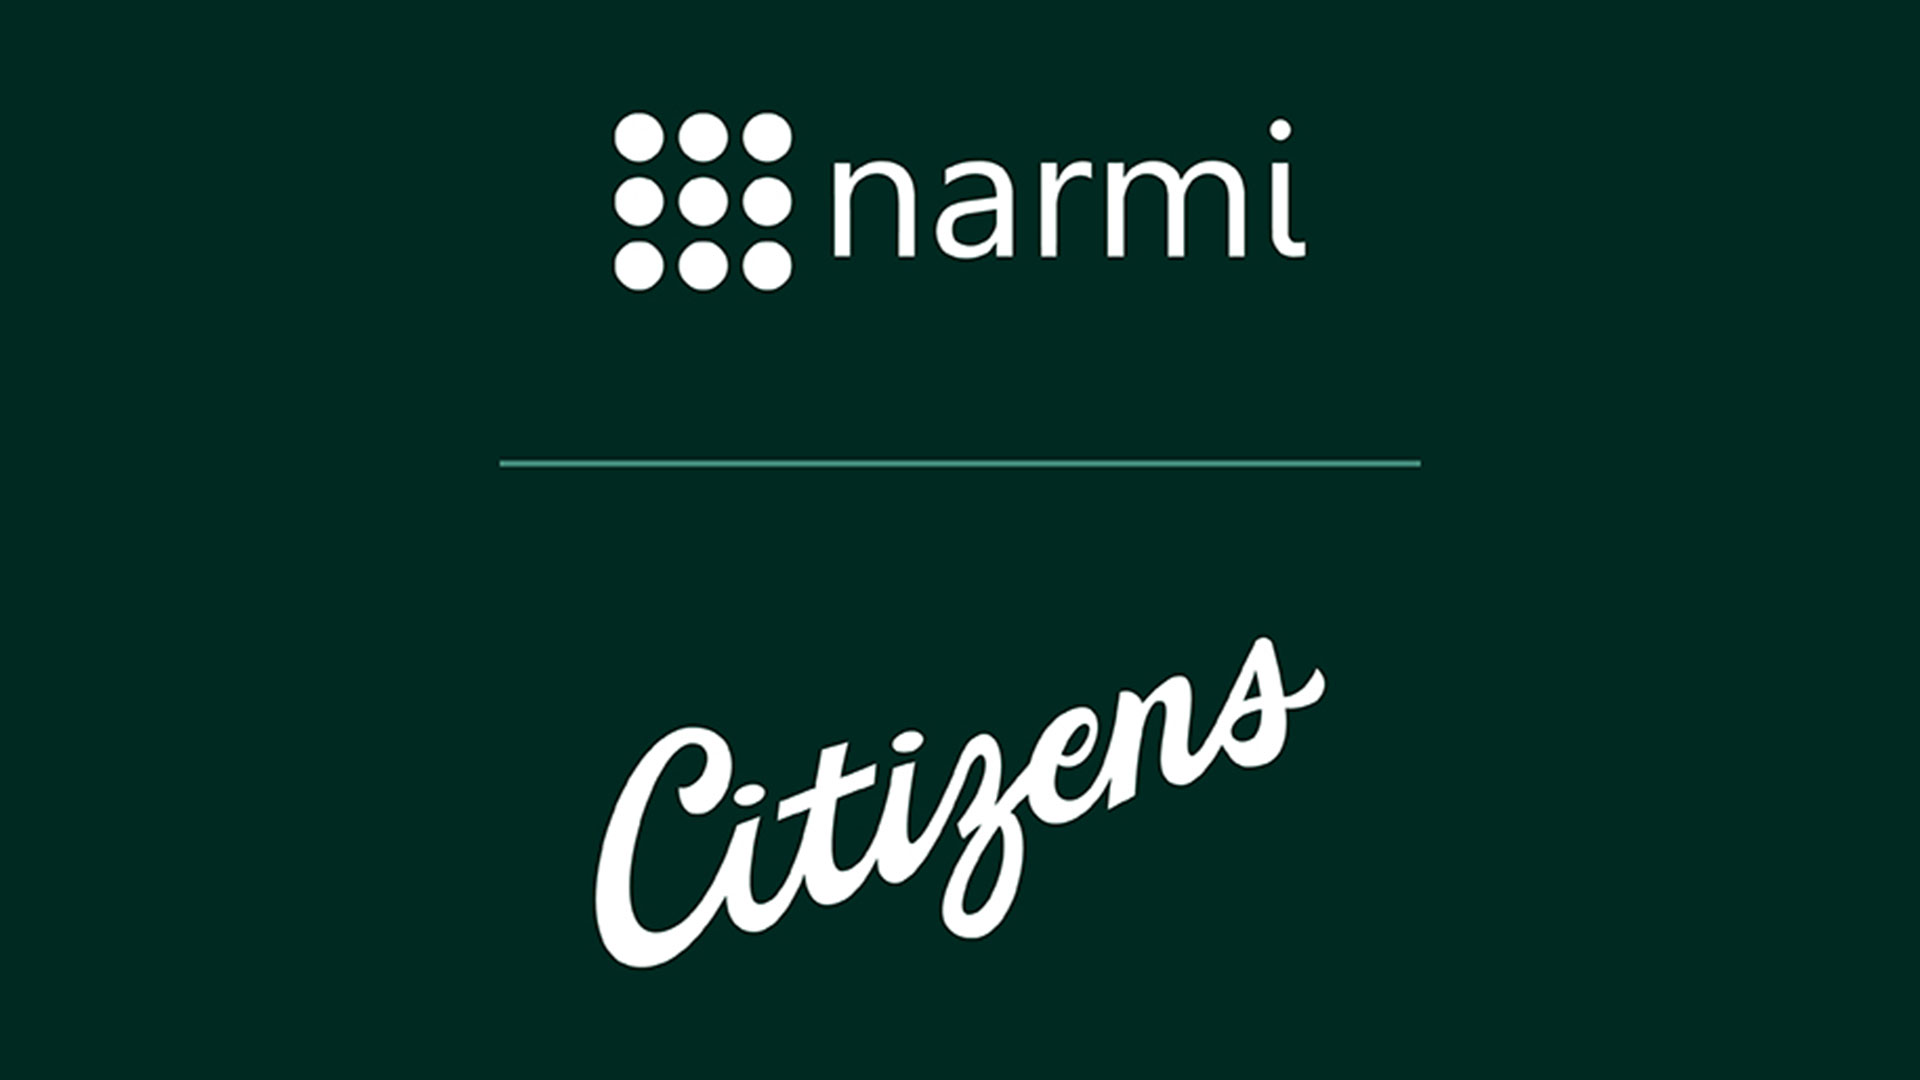 Citizens Bank of Edmond Elevates Customer Experience with Narmi’s Digital Banking Solutions